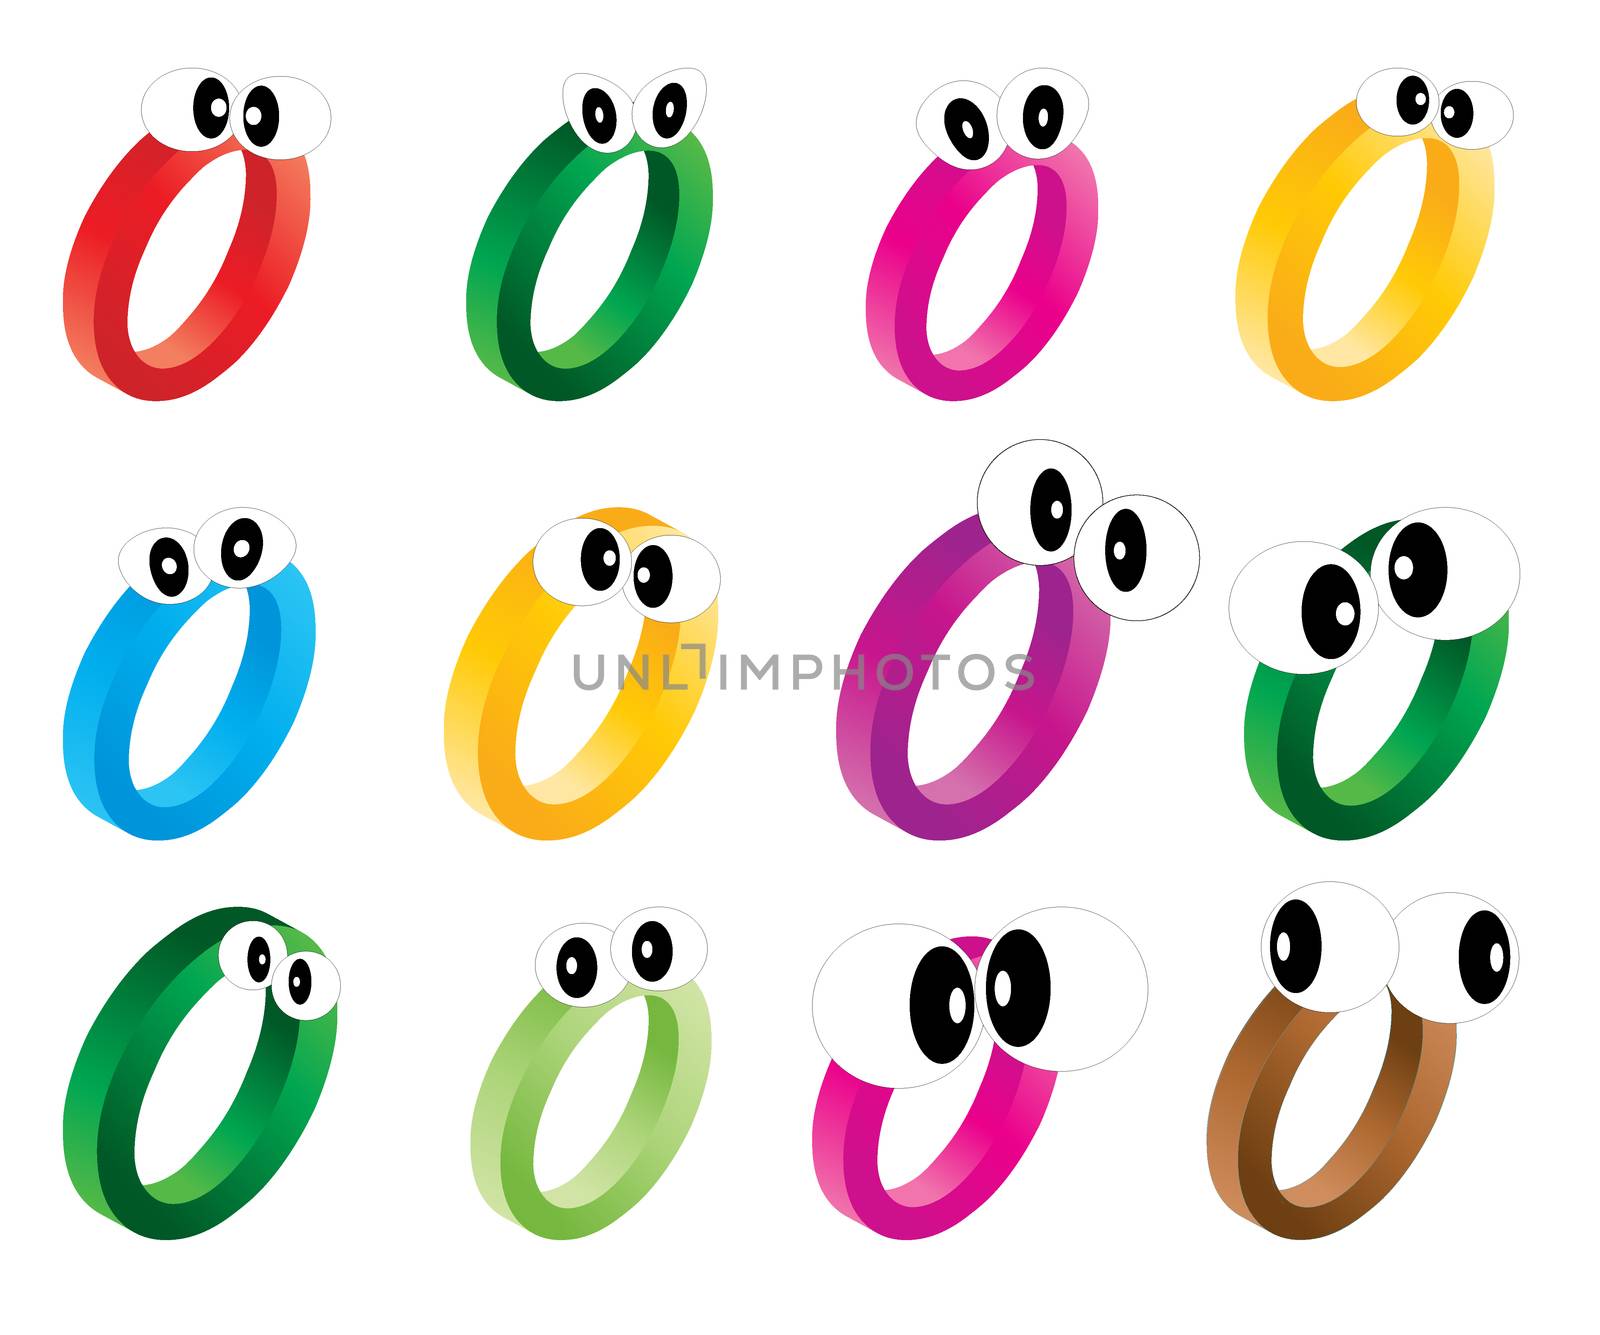 Image of cartoon number, digit zero with eyes. Funny, cheerful and colorful illustration for children isolated on white background.